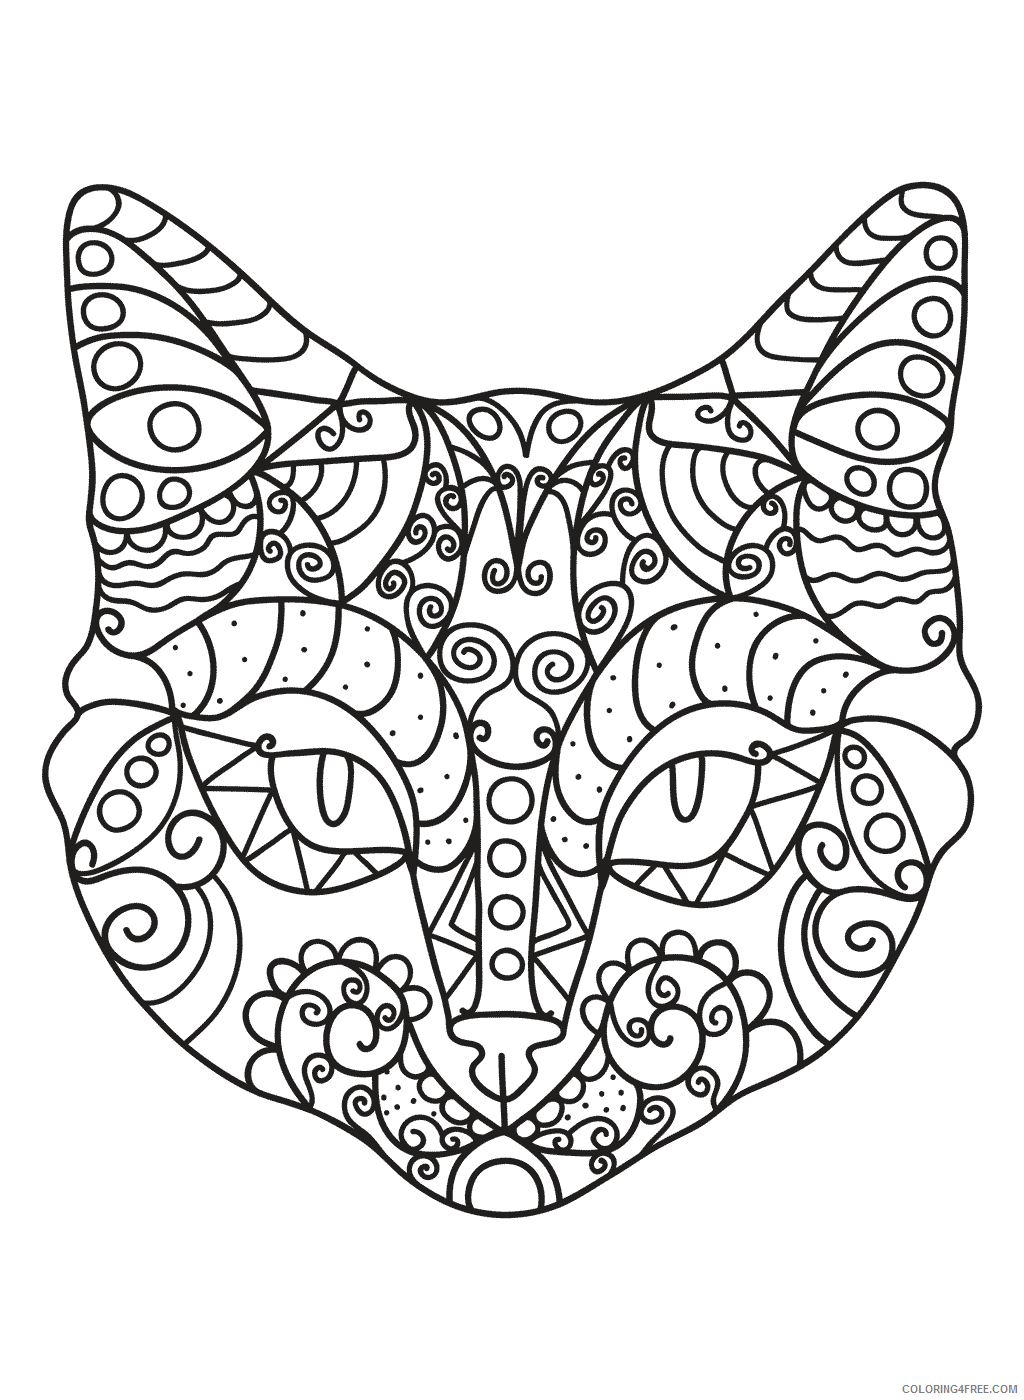 Animal Zentangle Coloring Pages Zentangle Cat Face Printable 2020 231 Coloring4free